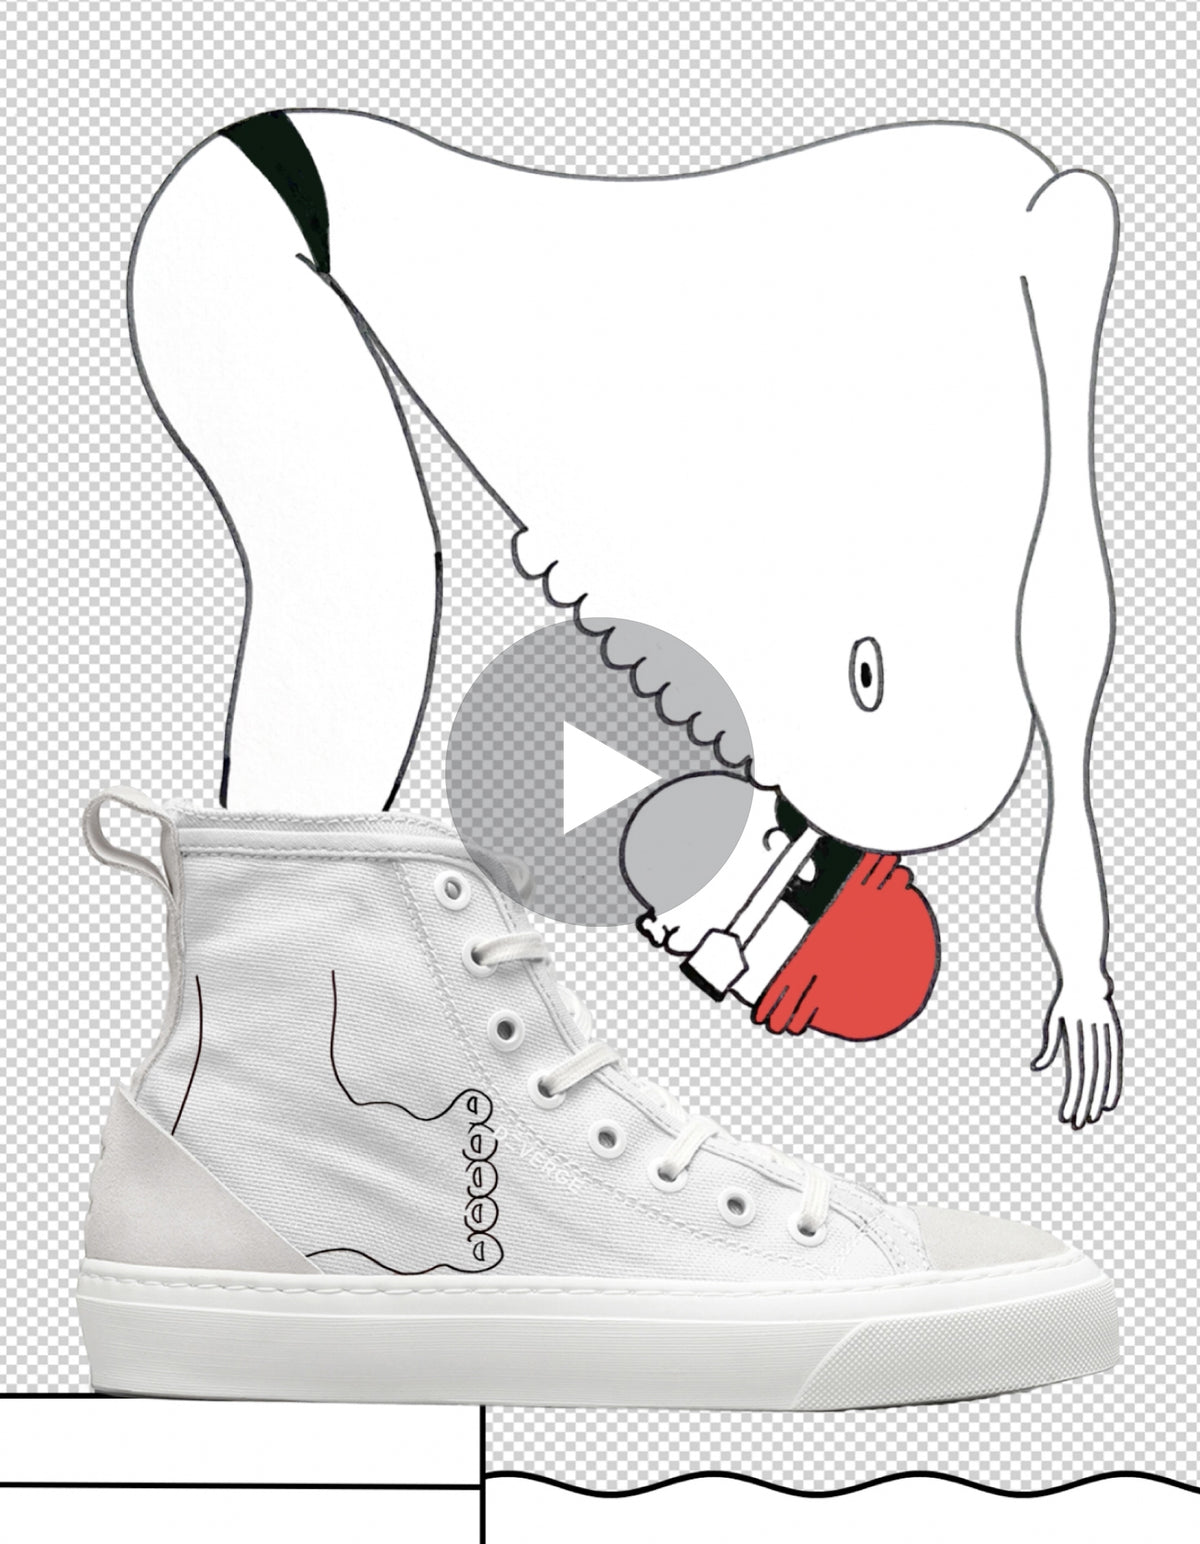 Illustration showing a large white creature bending over to look curiously at a MADE by proxy 2/5 shoe, set against a checkered background.